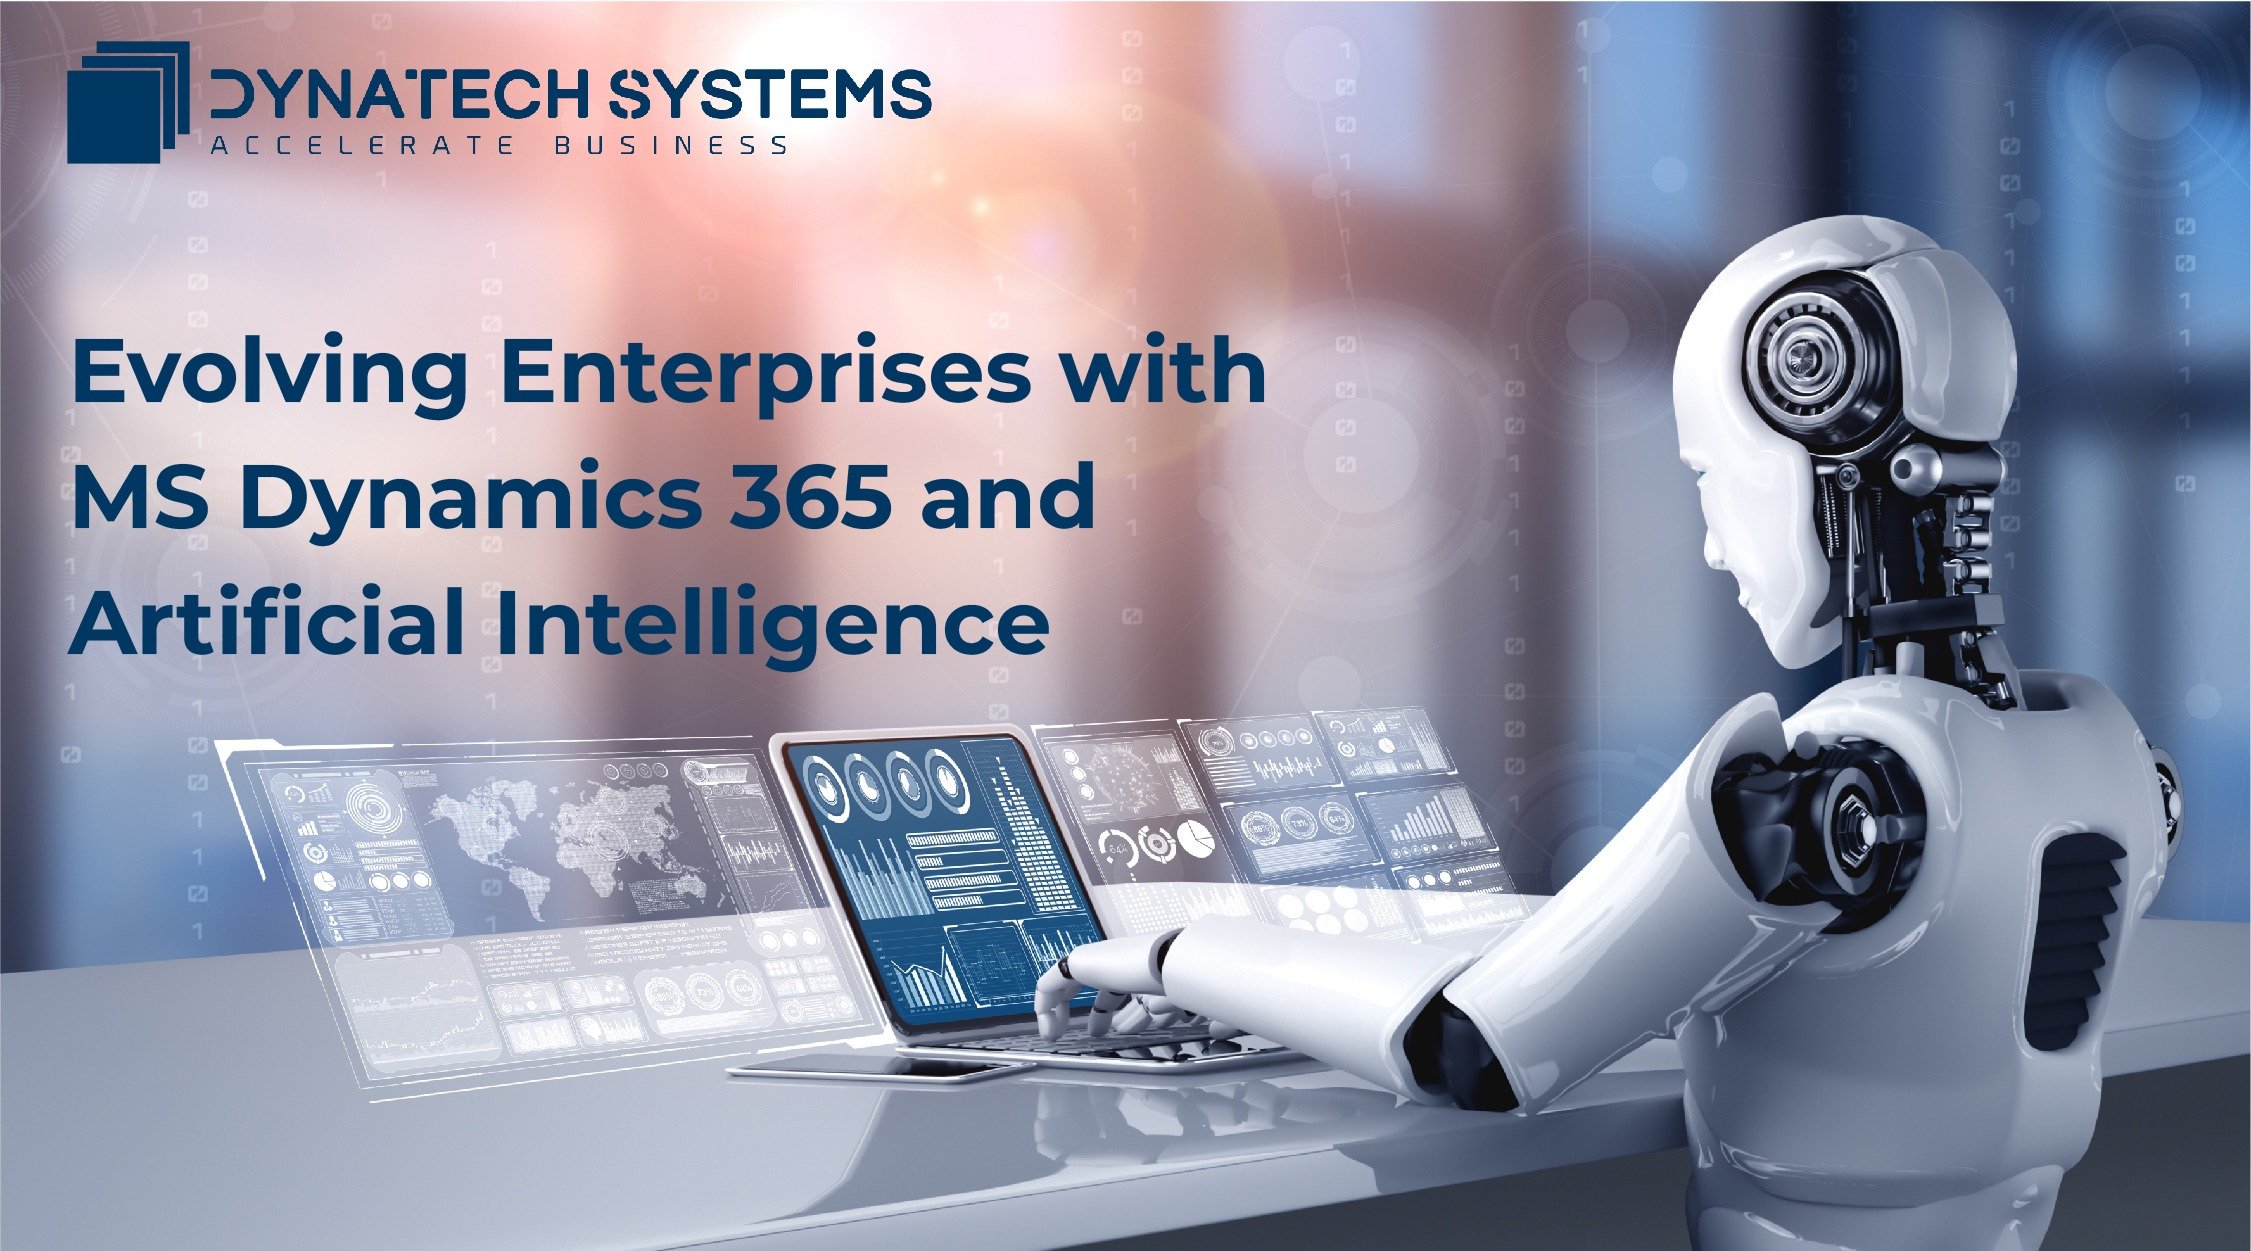 Evolving Enterprises with MS Dynamics 365 and Artificial Intelligence